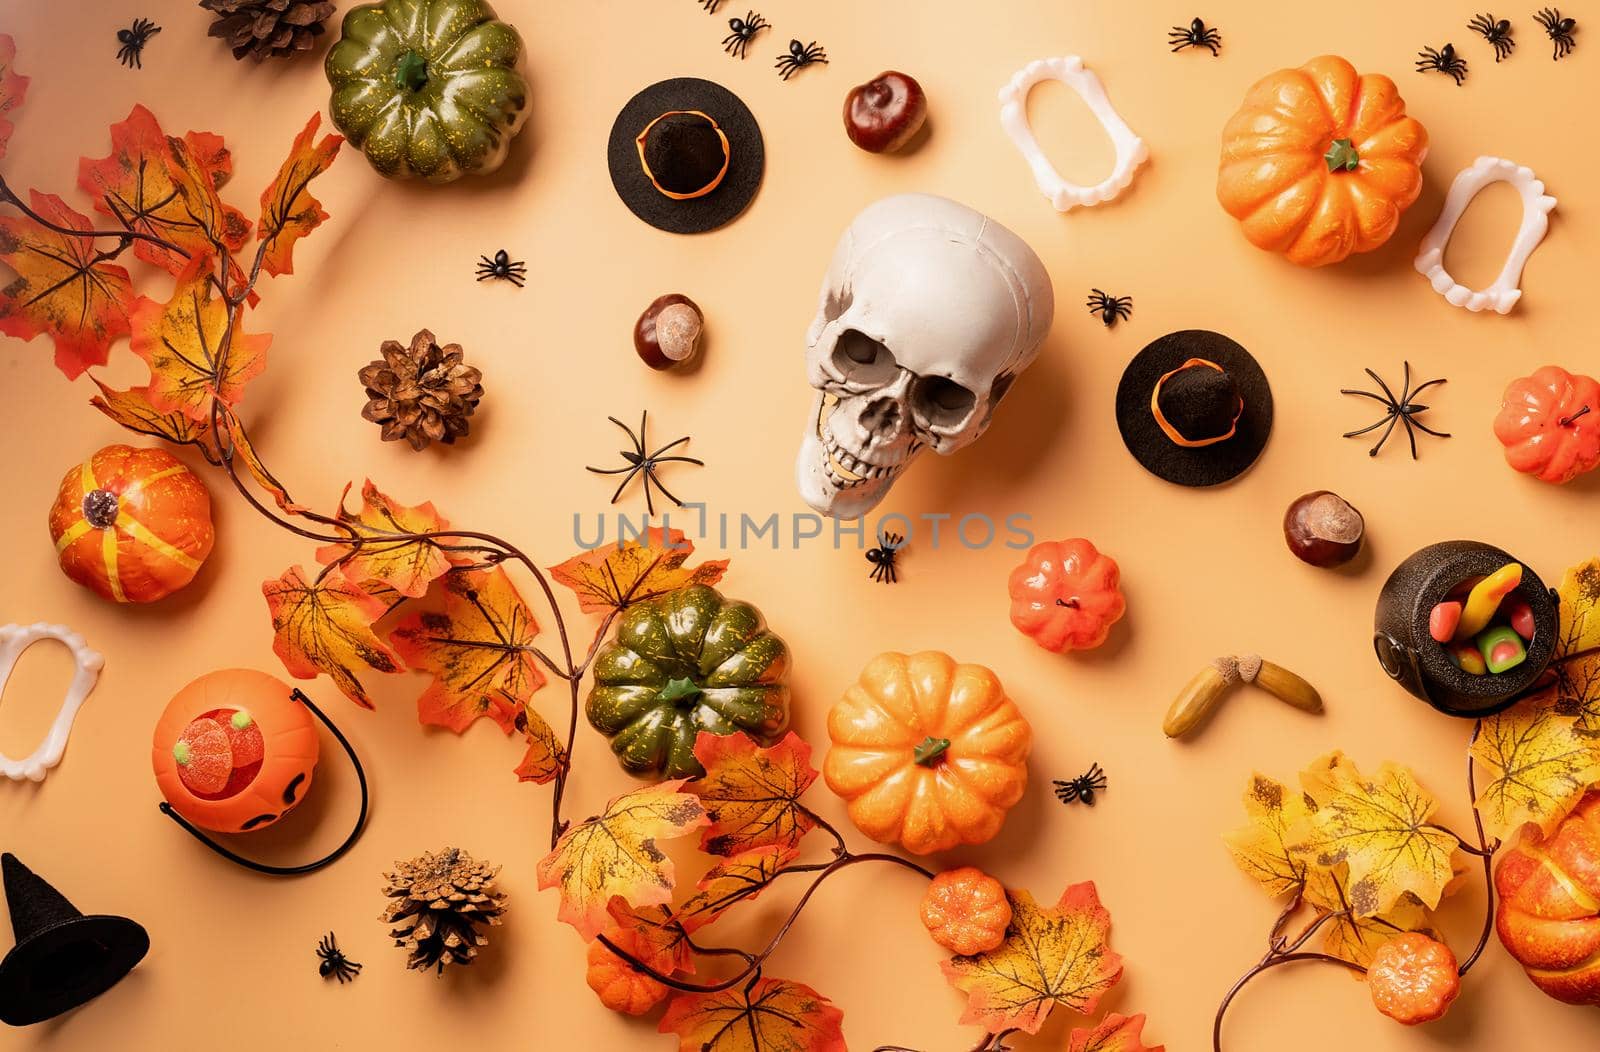 Halloween concept. Halloween holiday decorations with pumpkins and candies top view on orange background